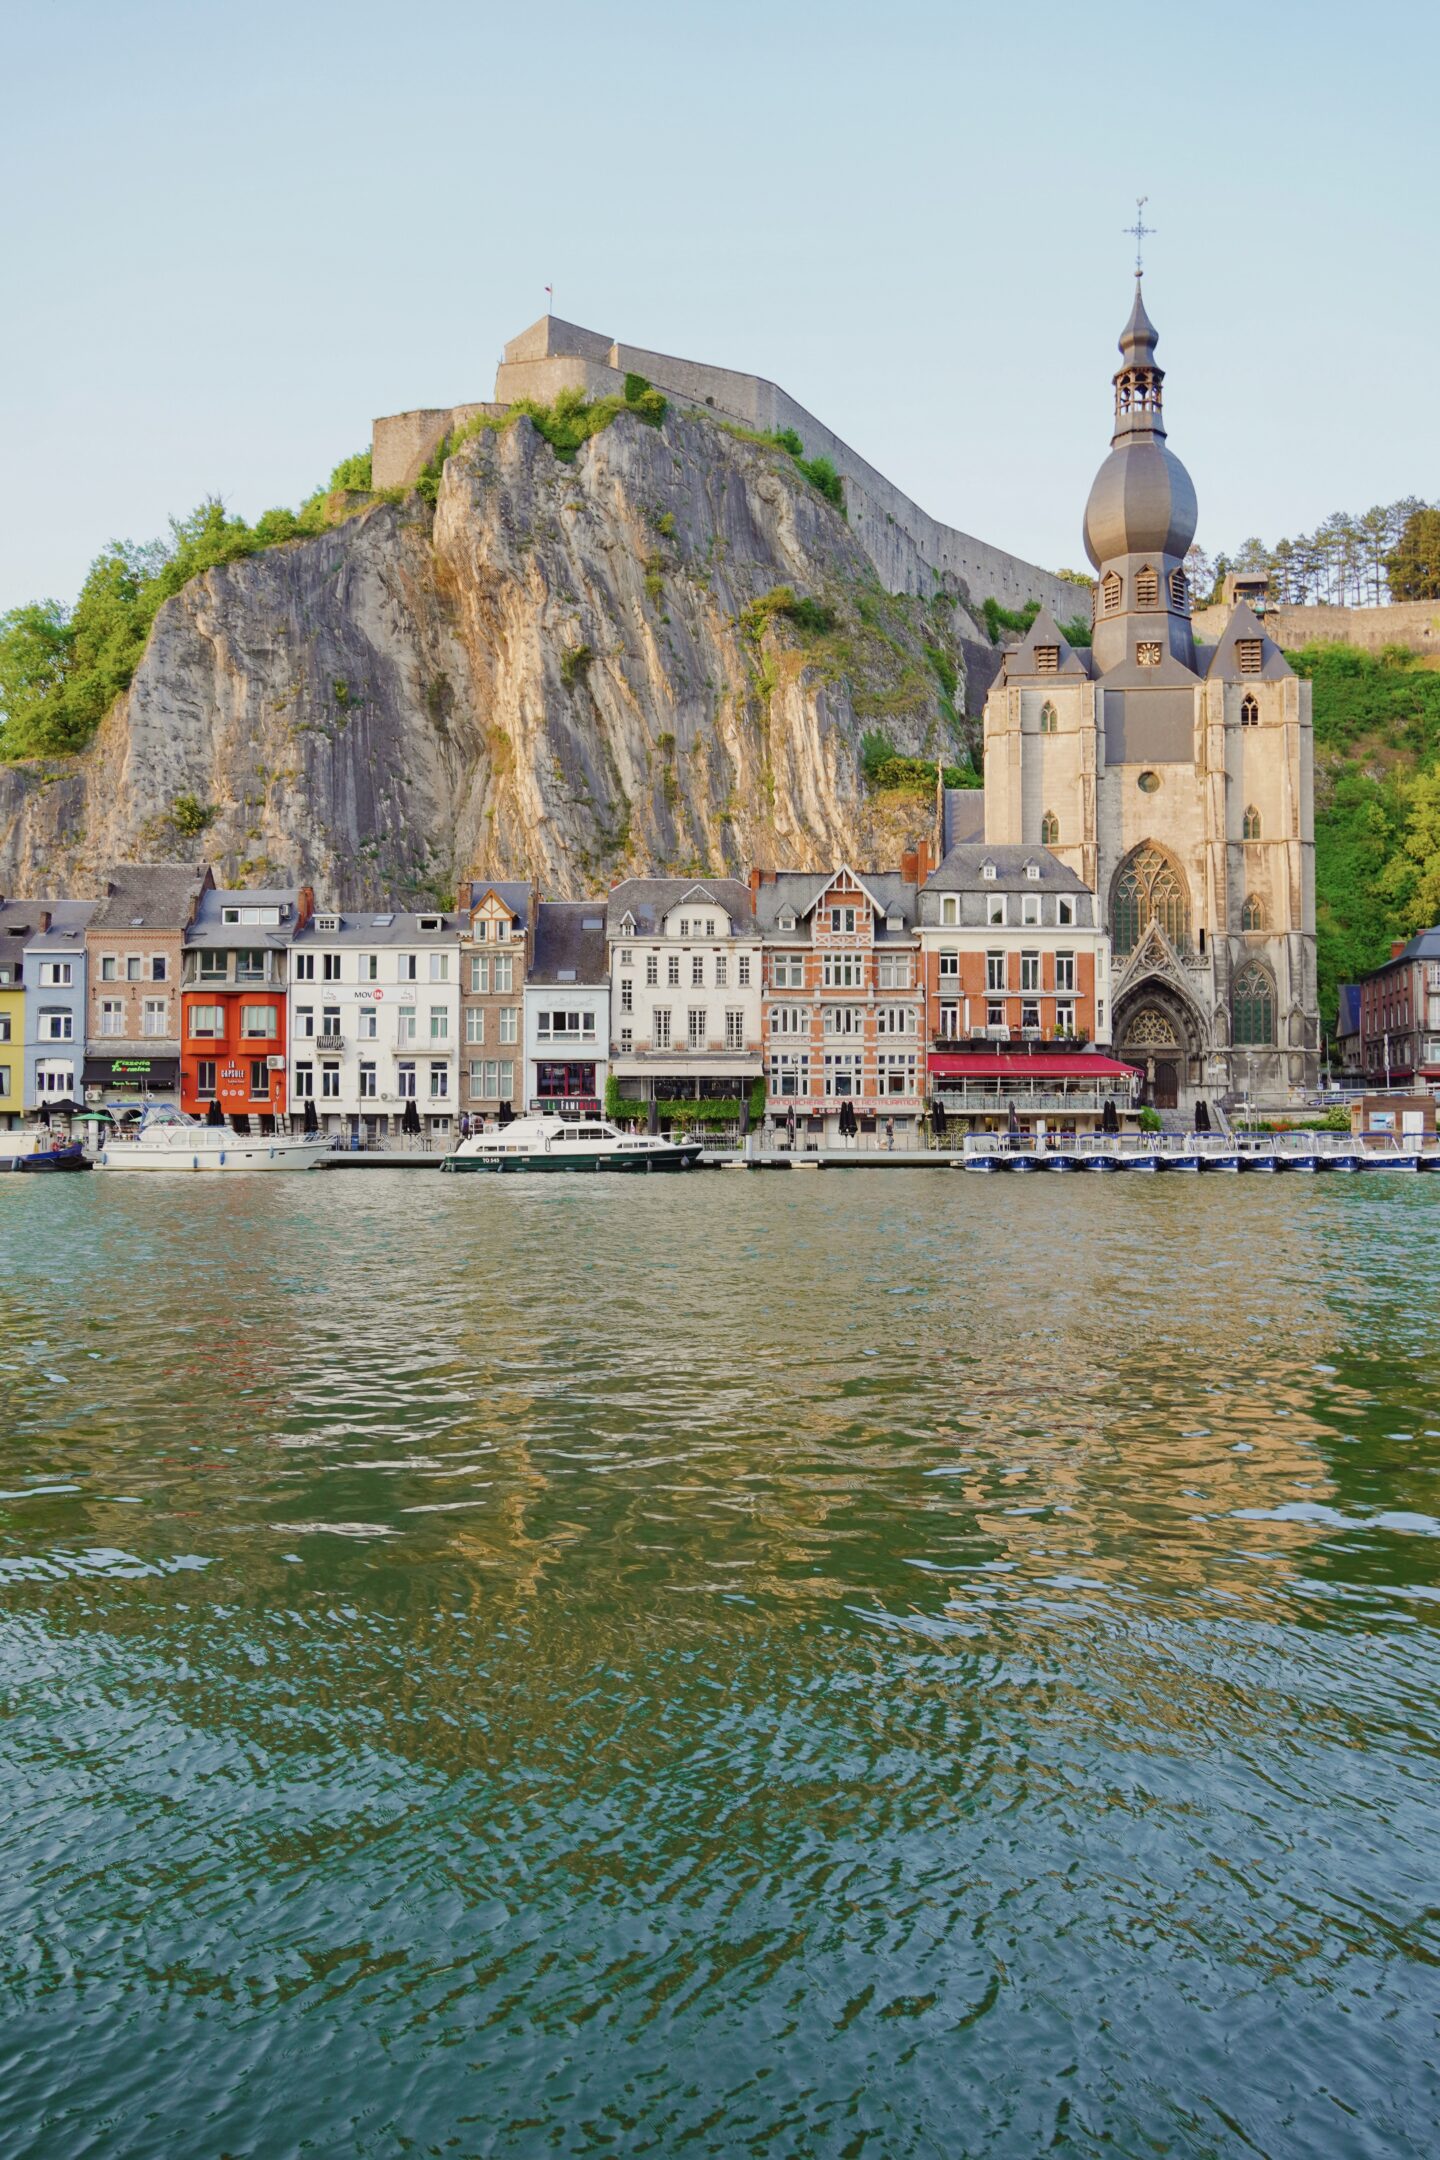 view of dinant belgium. colorful Belgian buildings along blue water with cathedral and fortress in background